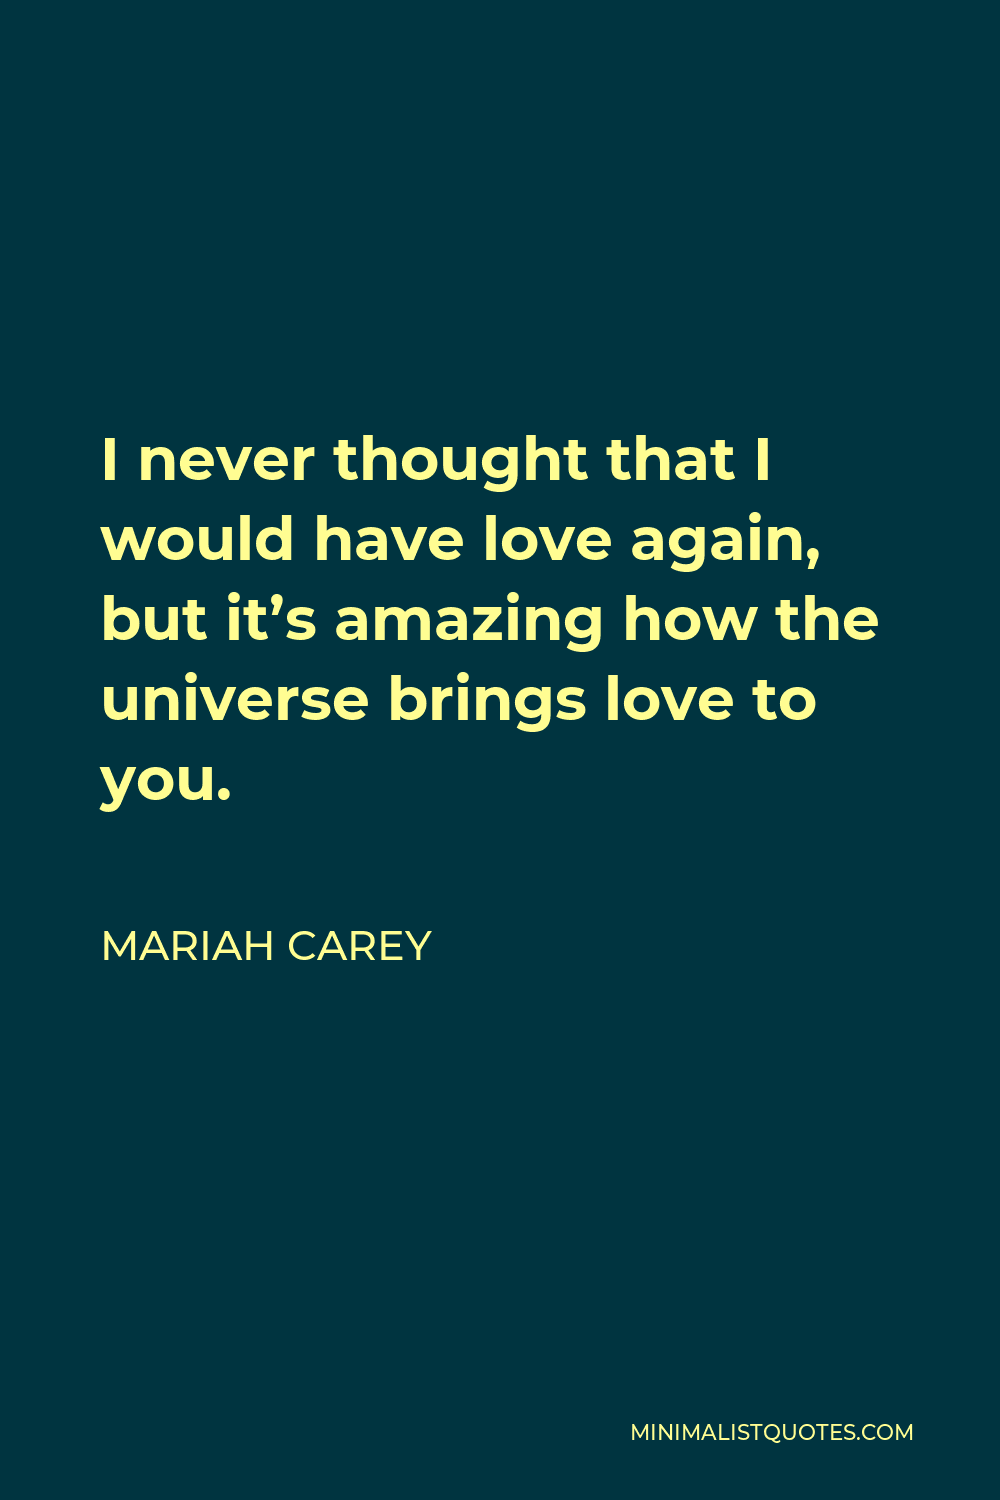 Mariah Carey Quote - I never thought that I would have love again, but it’s amazing how the universe brings love to you.